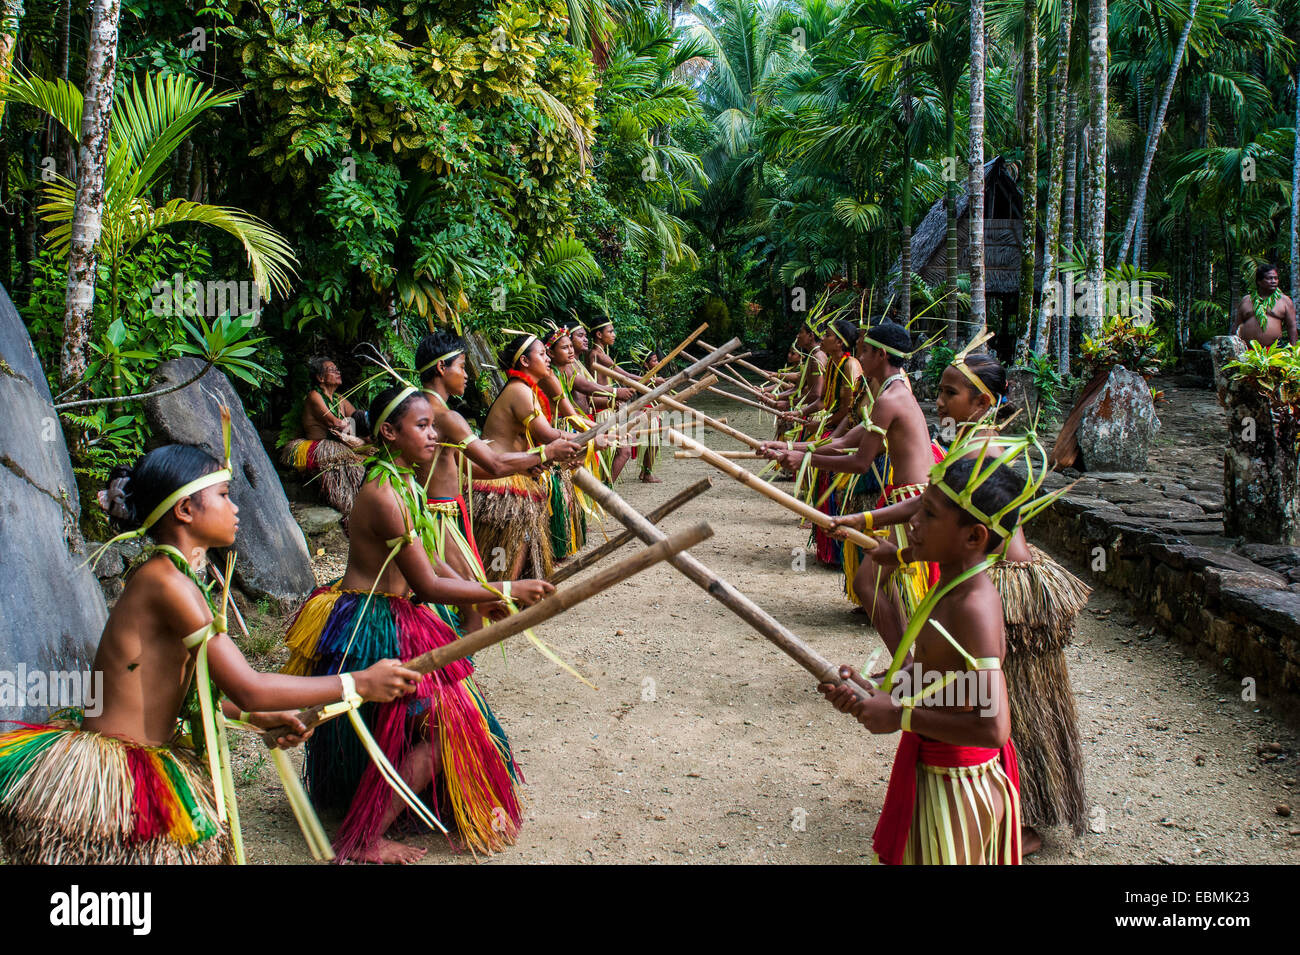 Stick dance performed by the tribal people of Yap Island, Caroline Islands, Micronesia Stock Photo